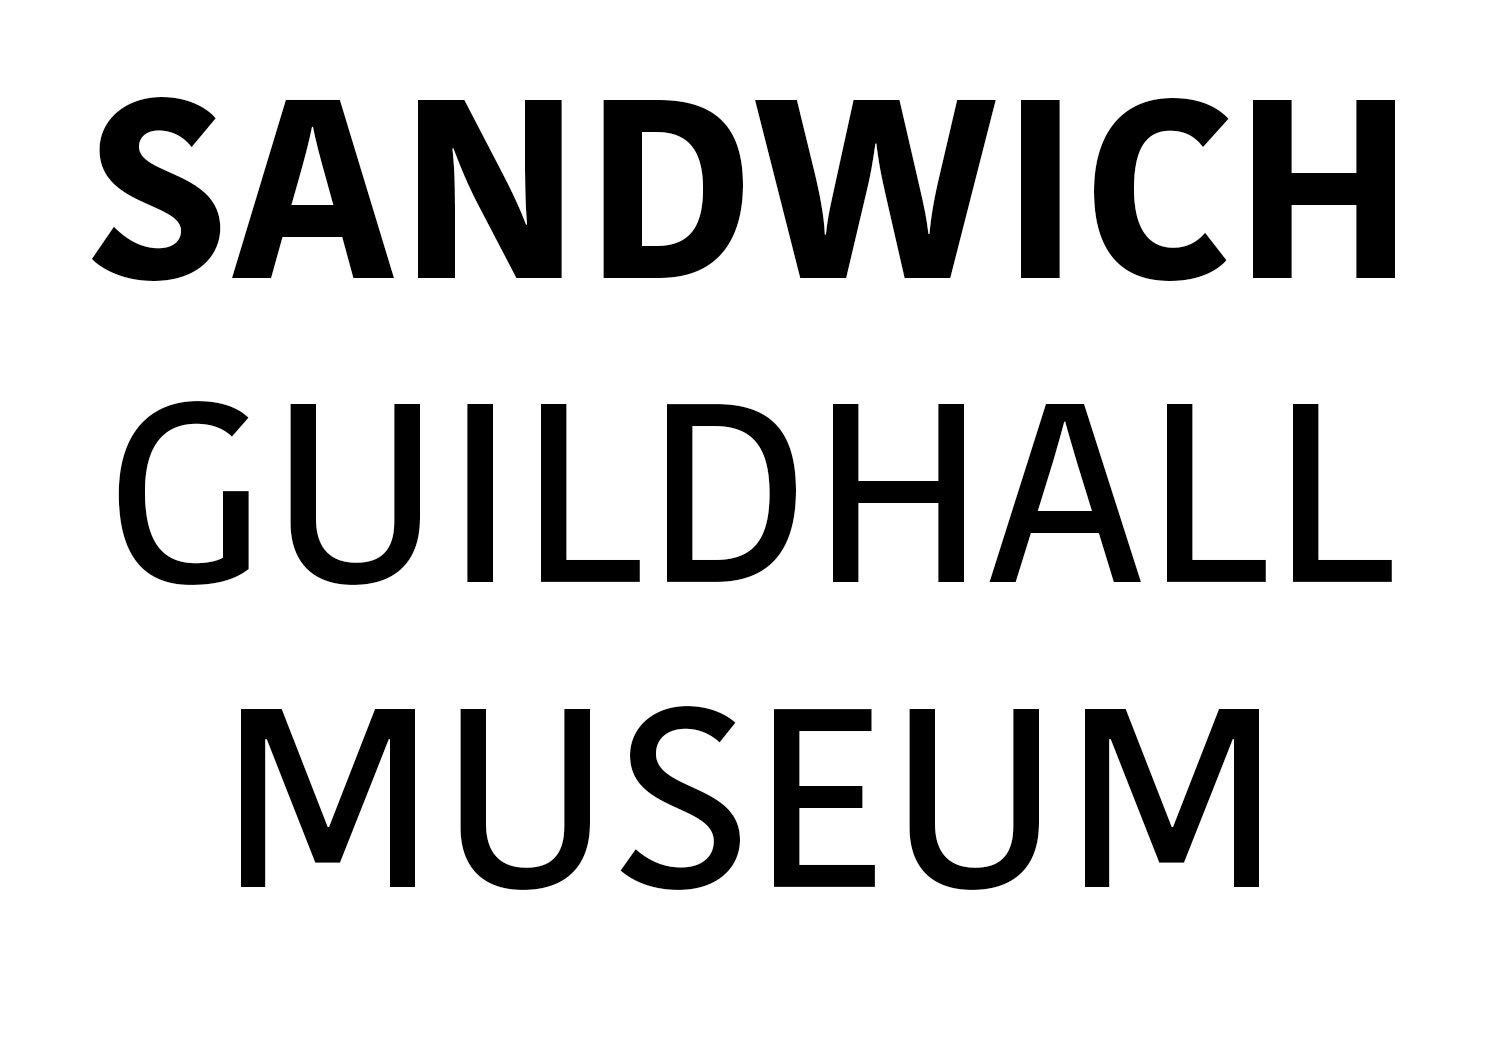 Sandwich Guildhall Museum